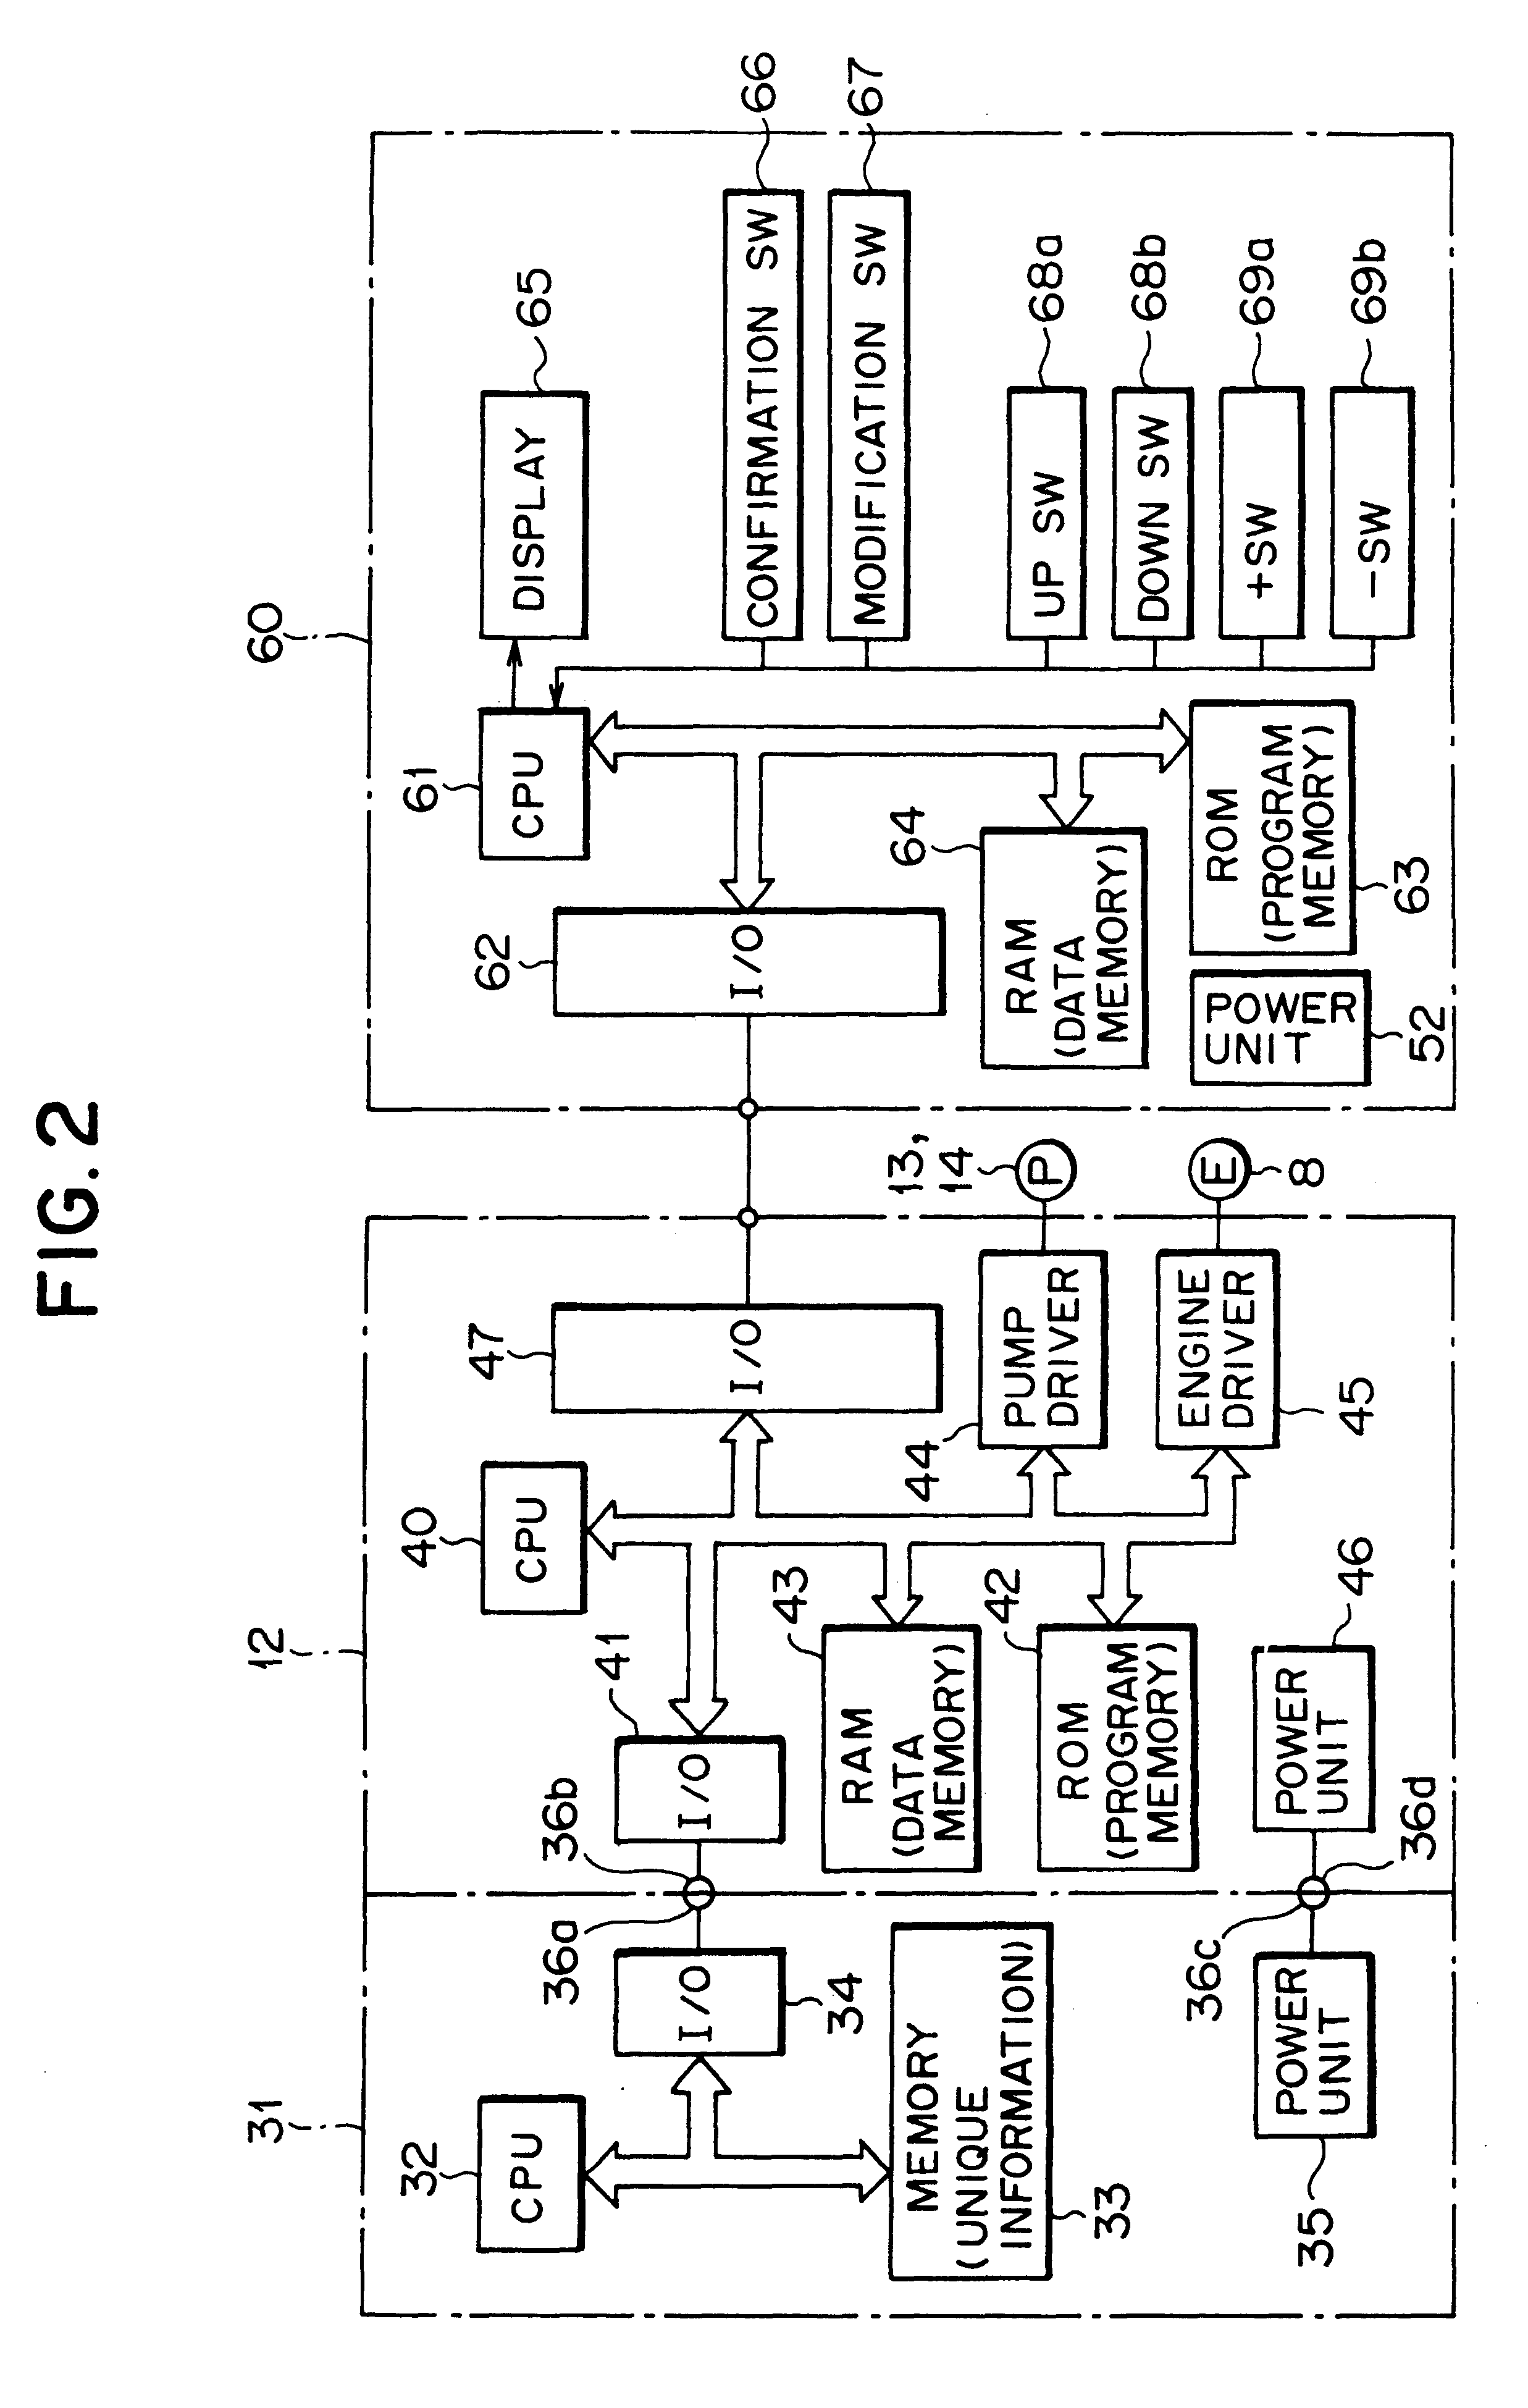 Control apparatus and control method for a construction machine